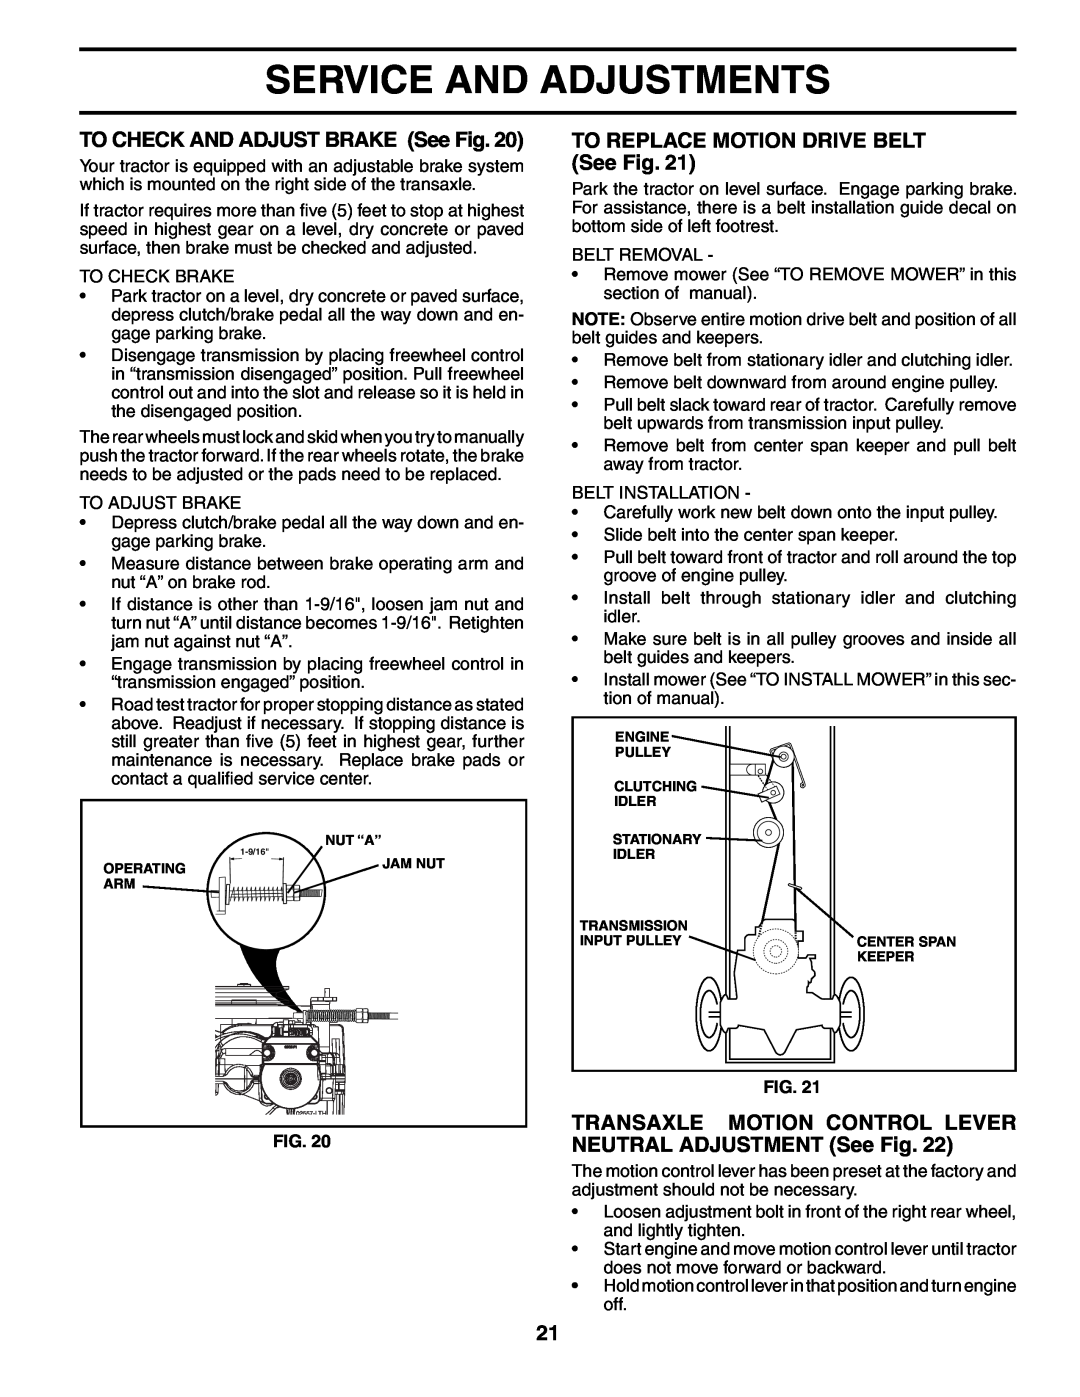 Poulan 194563 TO CHECK AND ADJUST BRAKE See Fig, TO REPLACE MOTION DRIVE BELT See Fig, Service And Adjustments, Nut “A” 